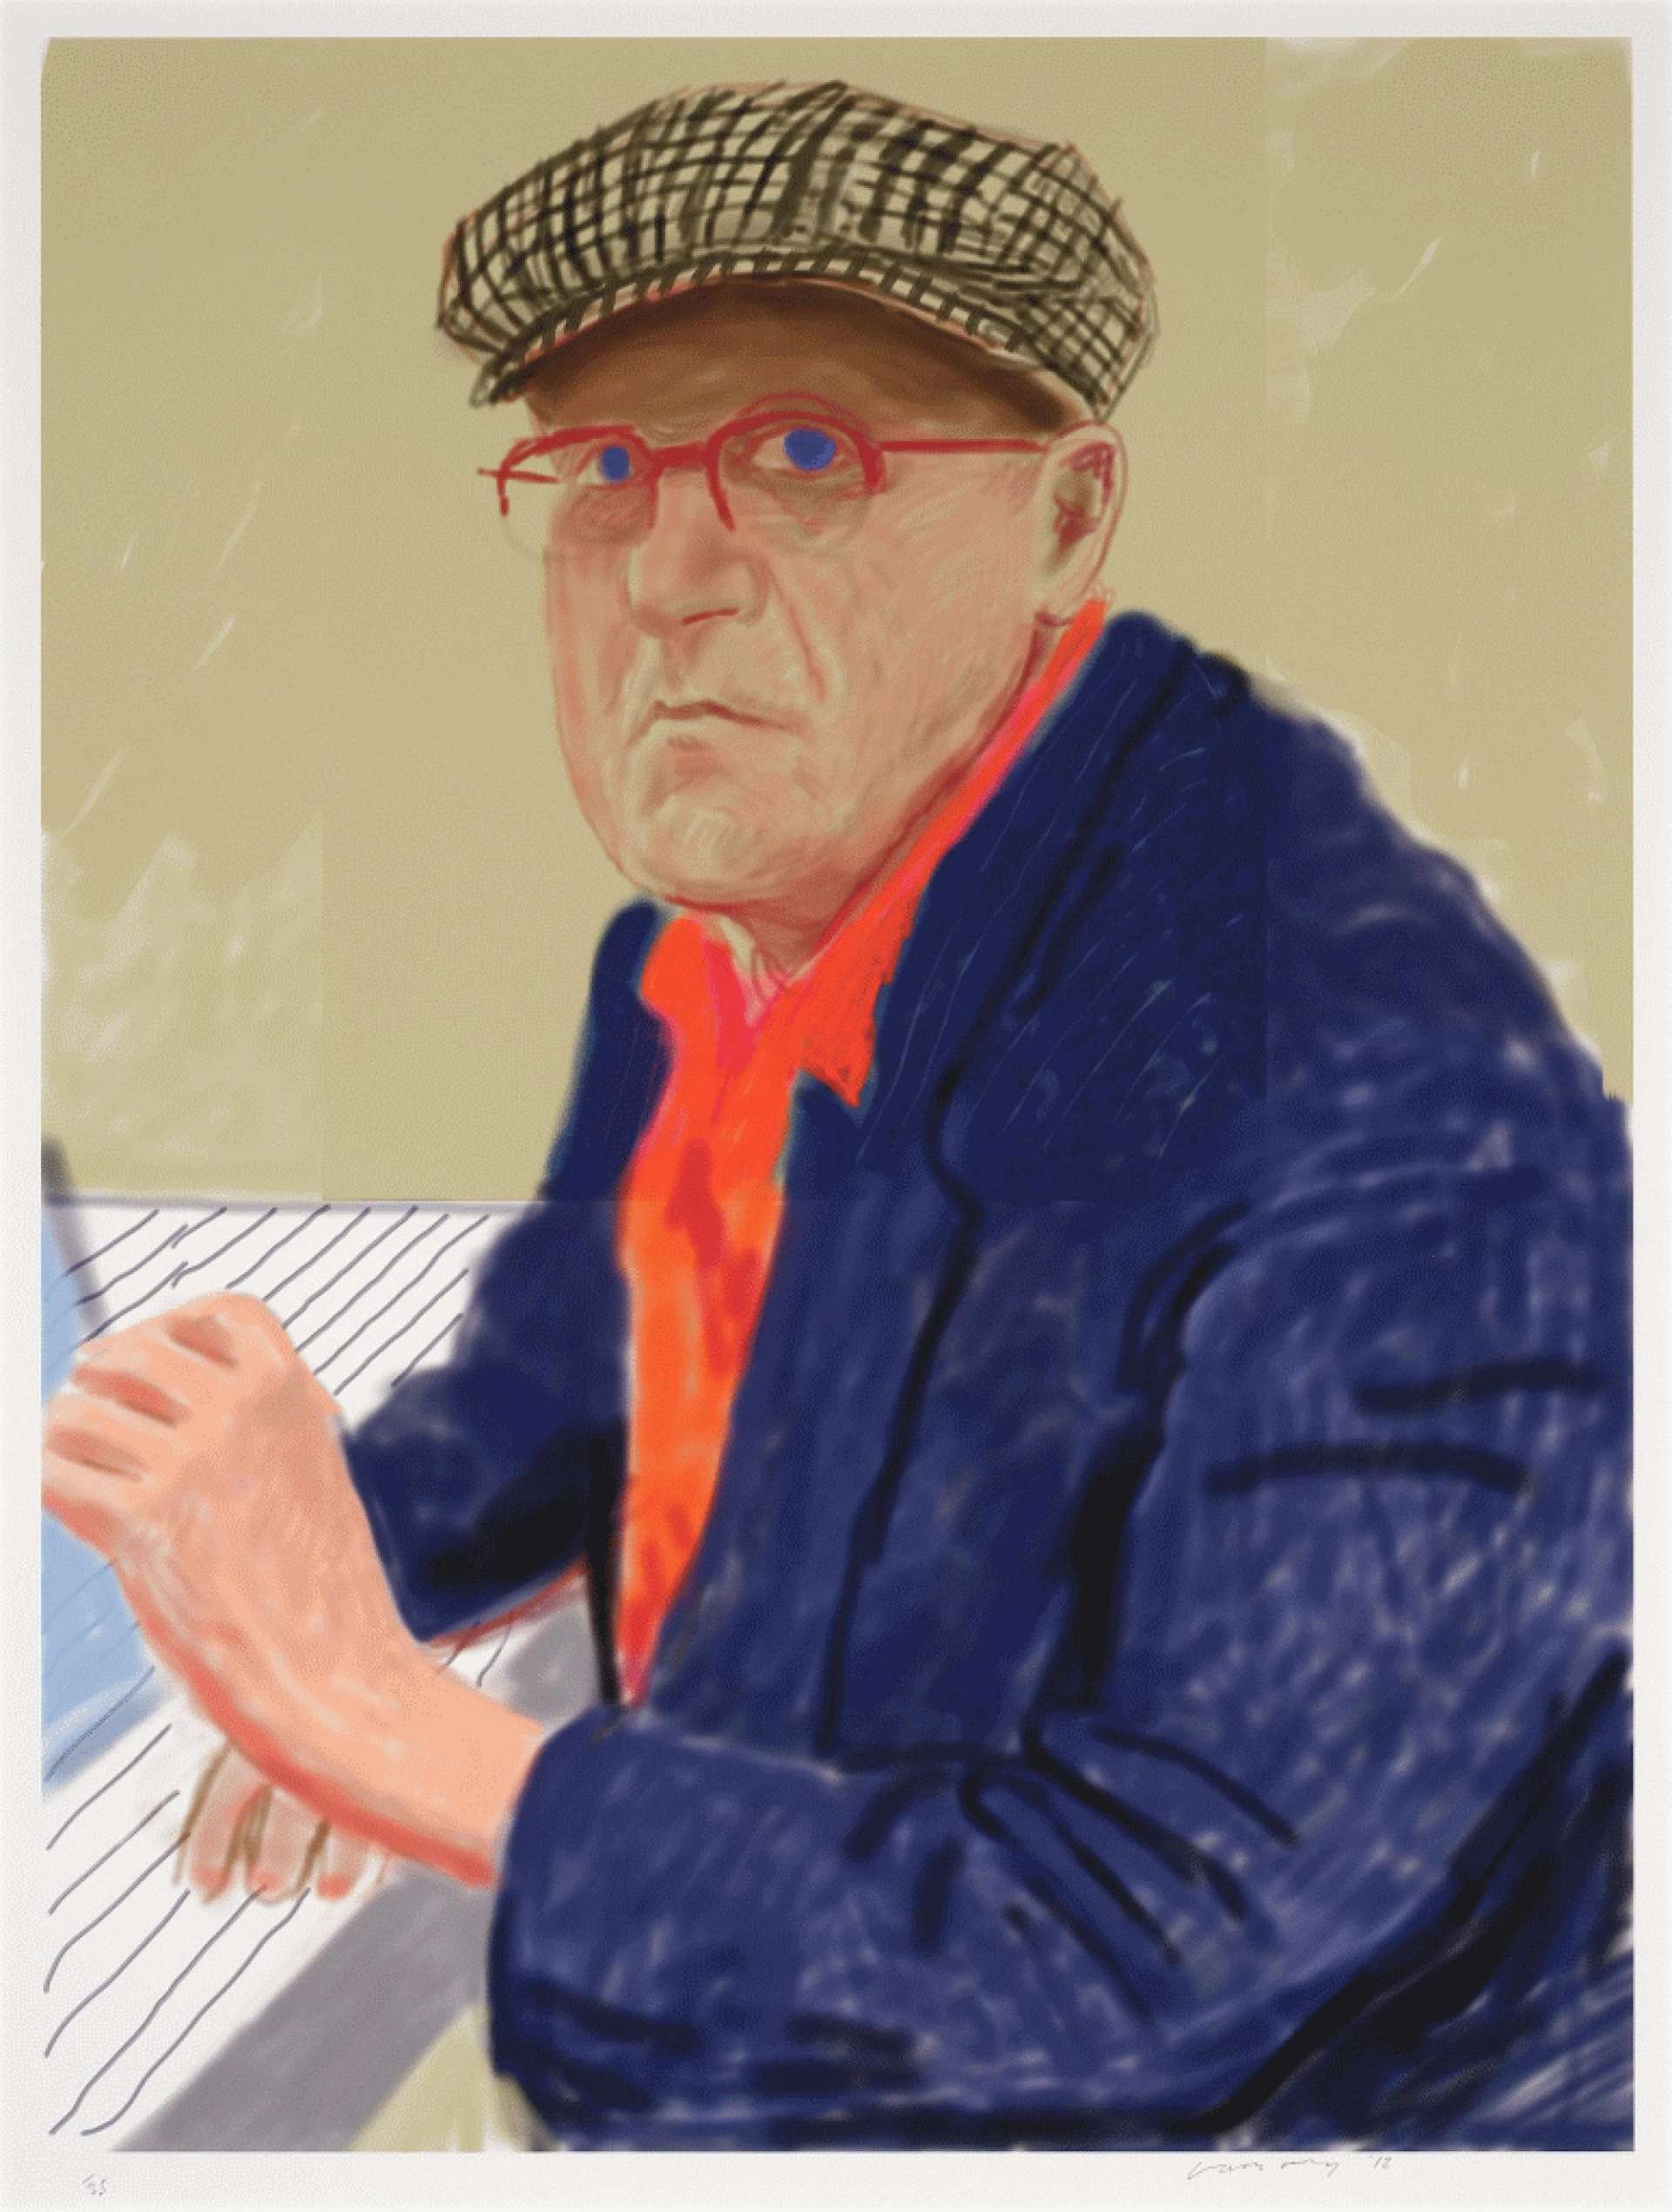 David Hockney’s Self-Portrait II. A digital print of David Hockney seated, wearing an orange shirt and blue jacket with red glasses and a hat. 